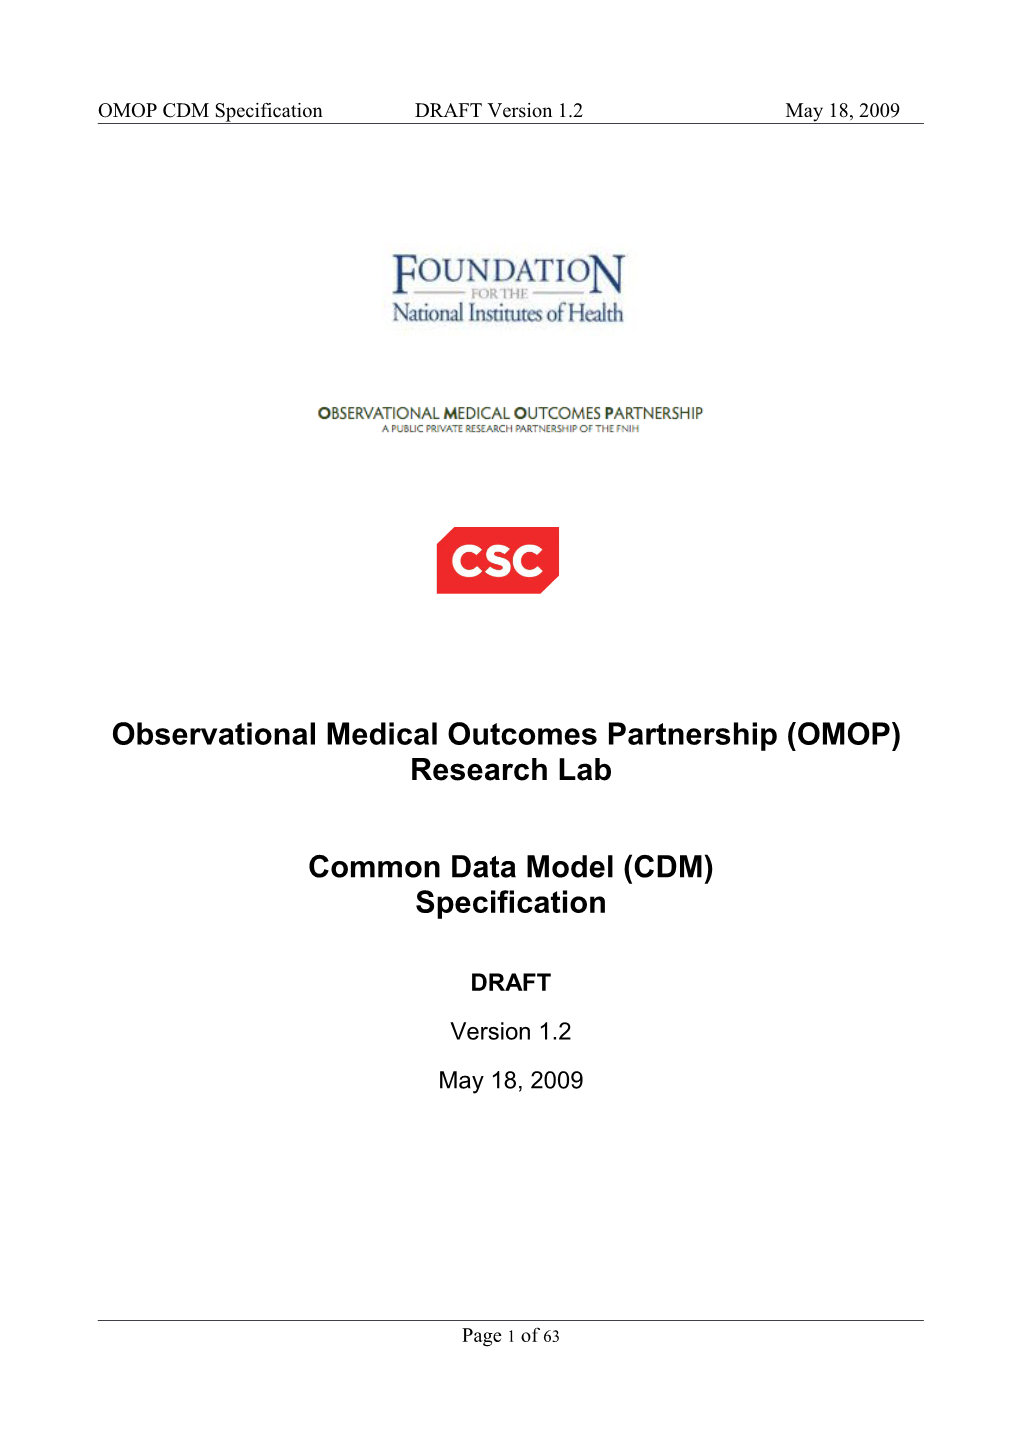 Observational Medical Outcomes Partnership (2009)